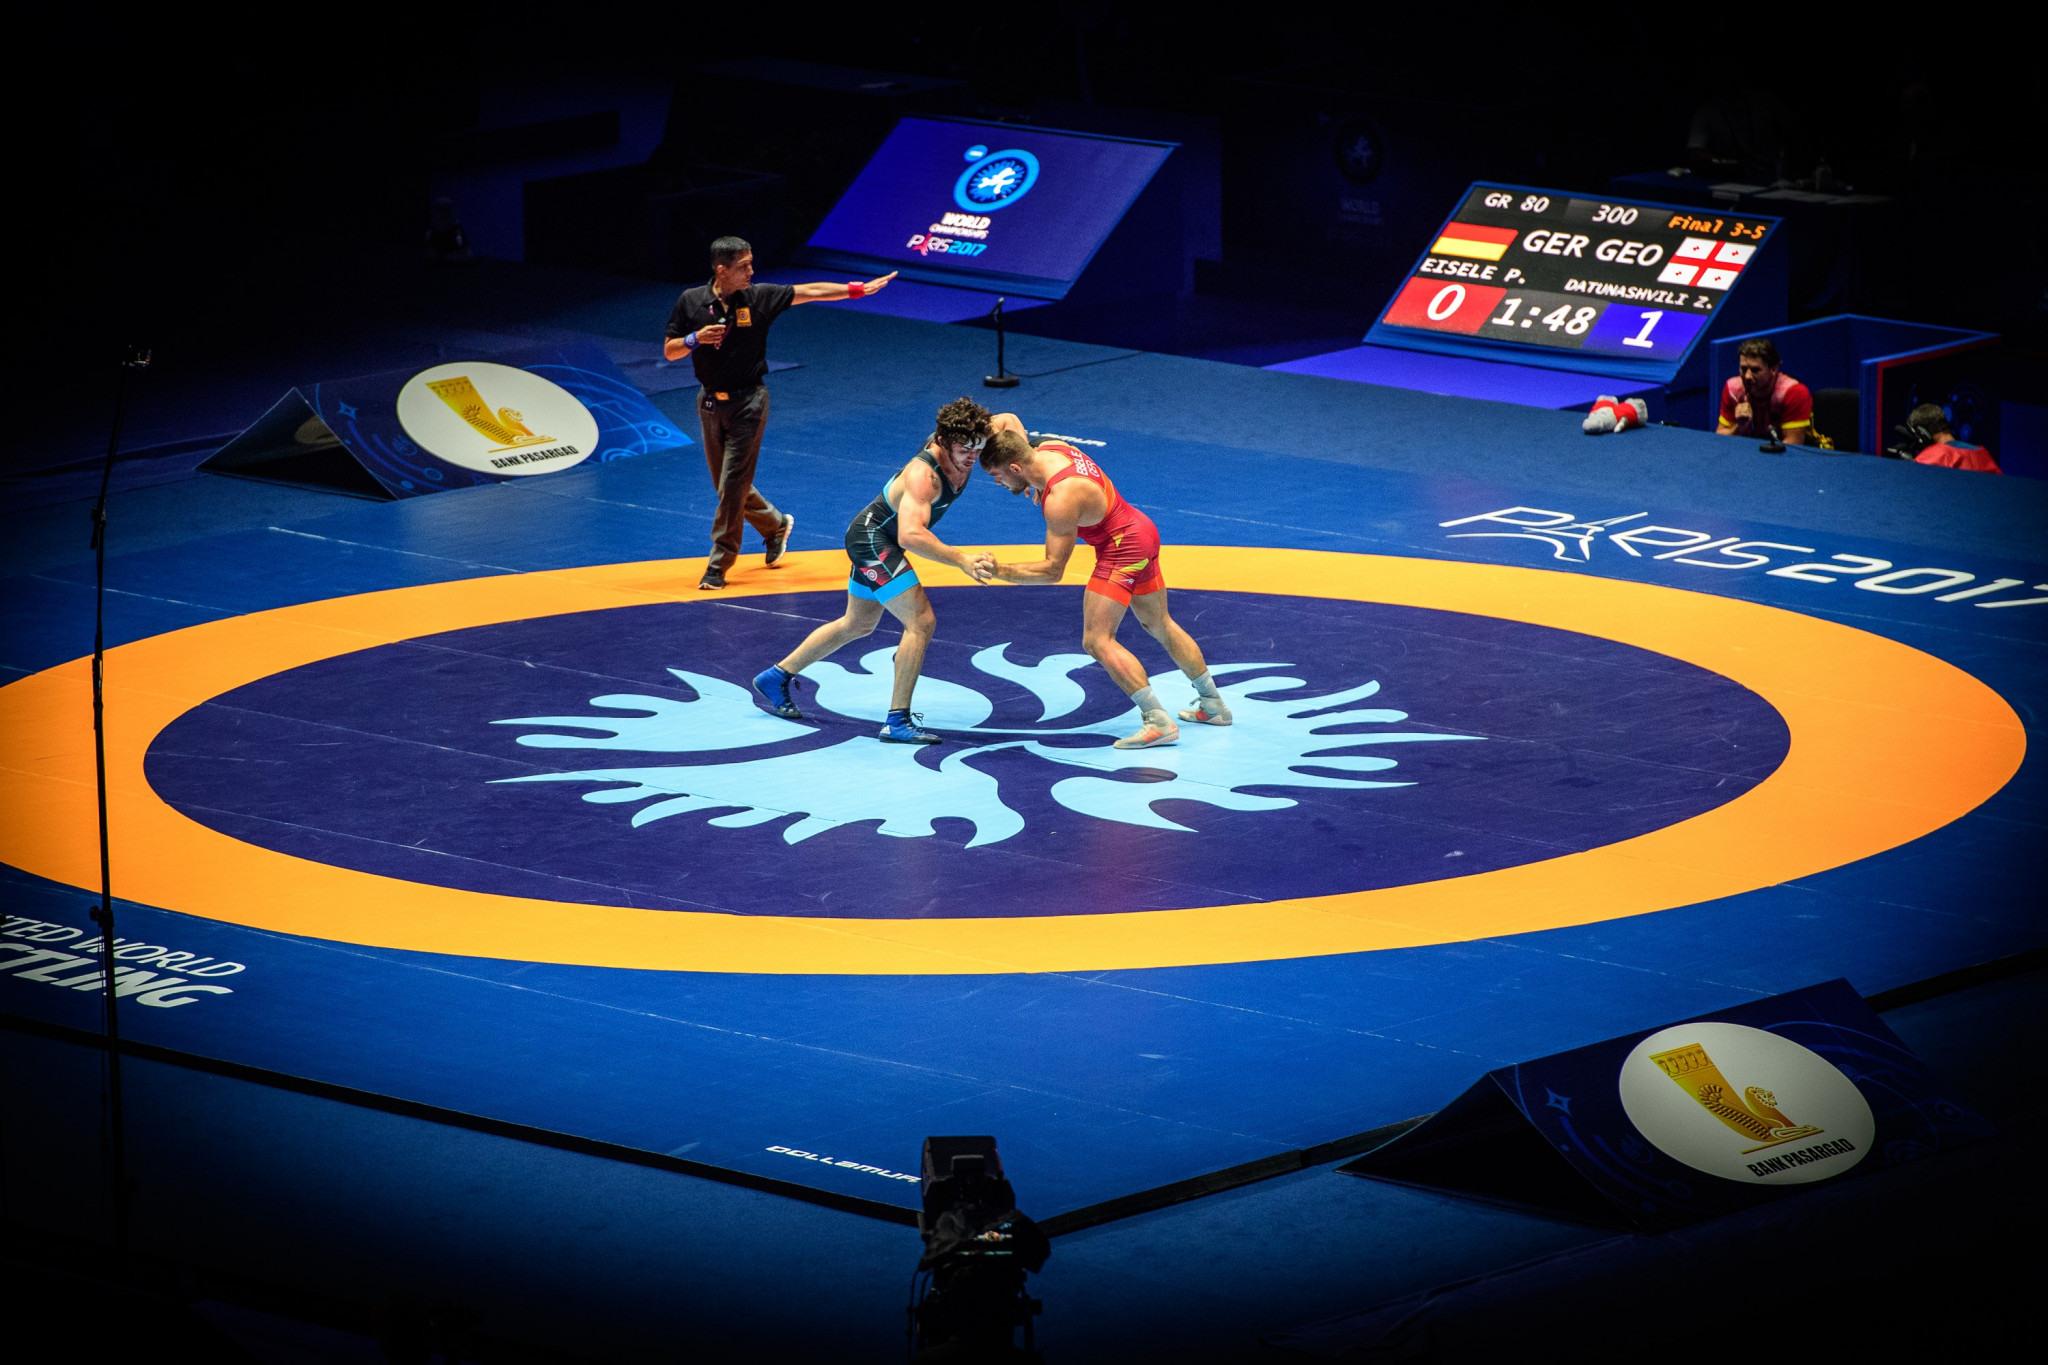 United World Wrestling announce changes to 2019 Ranking Series